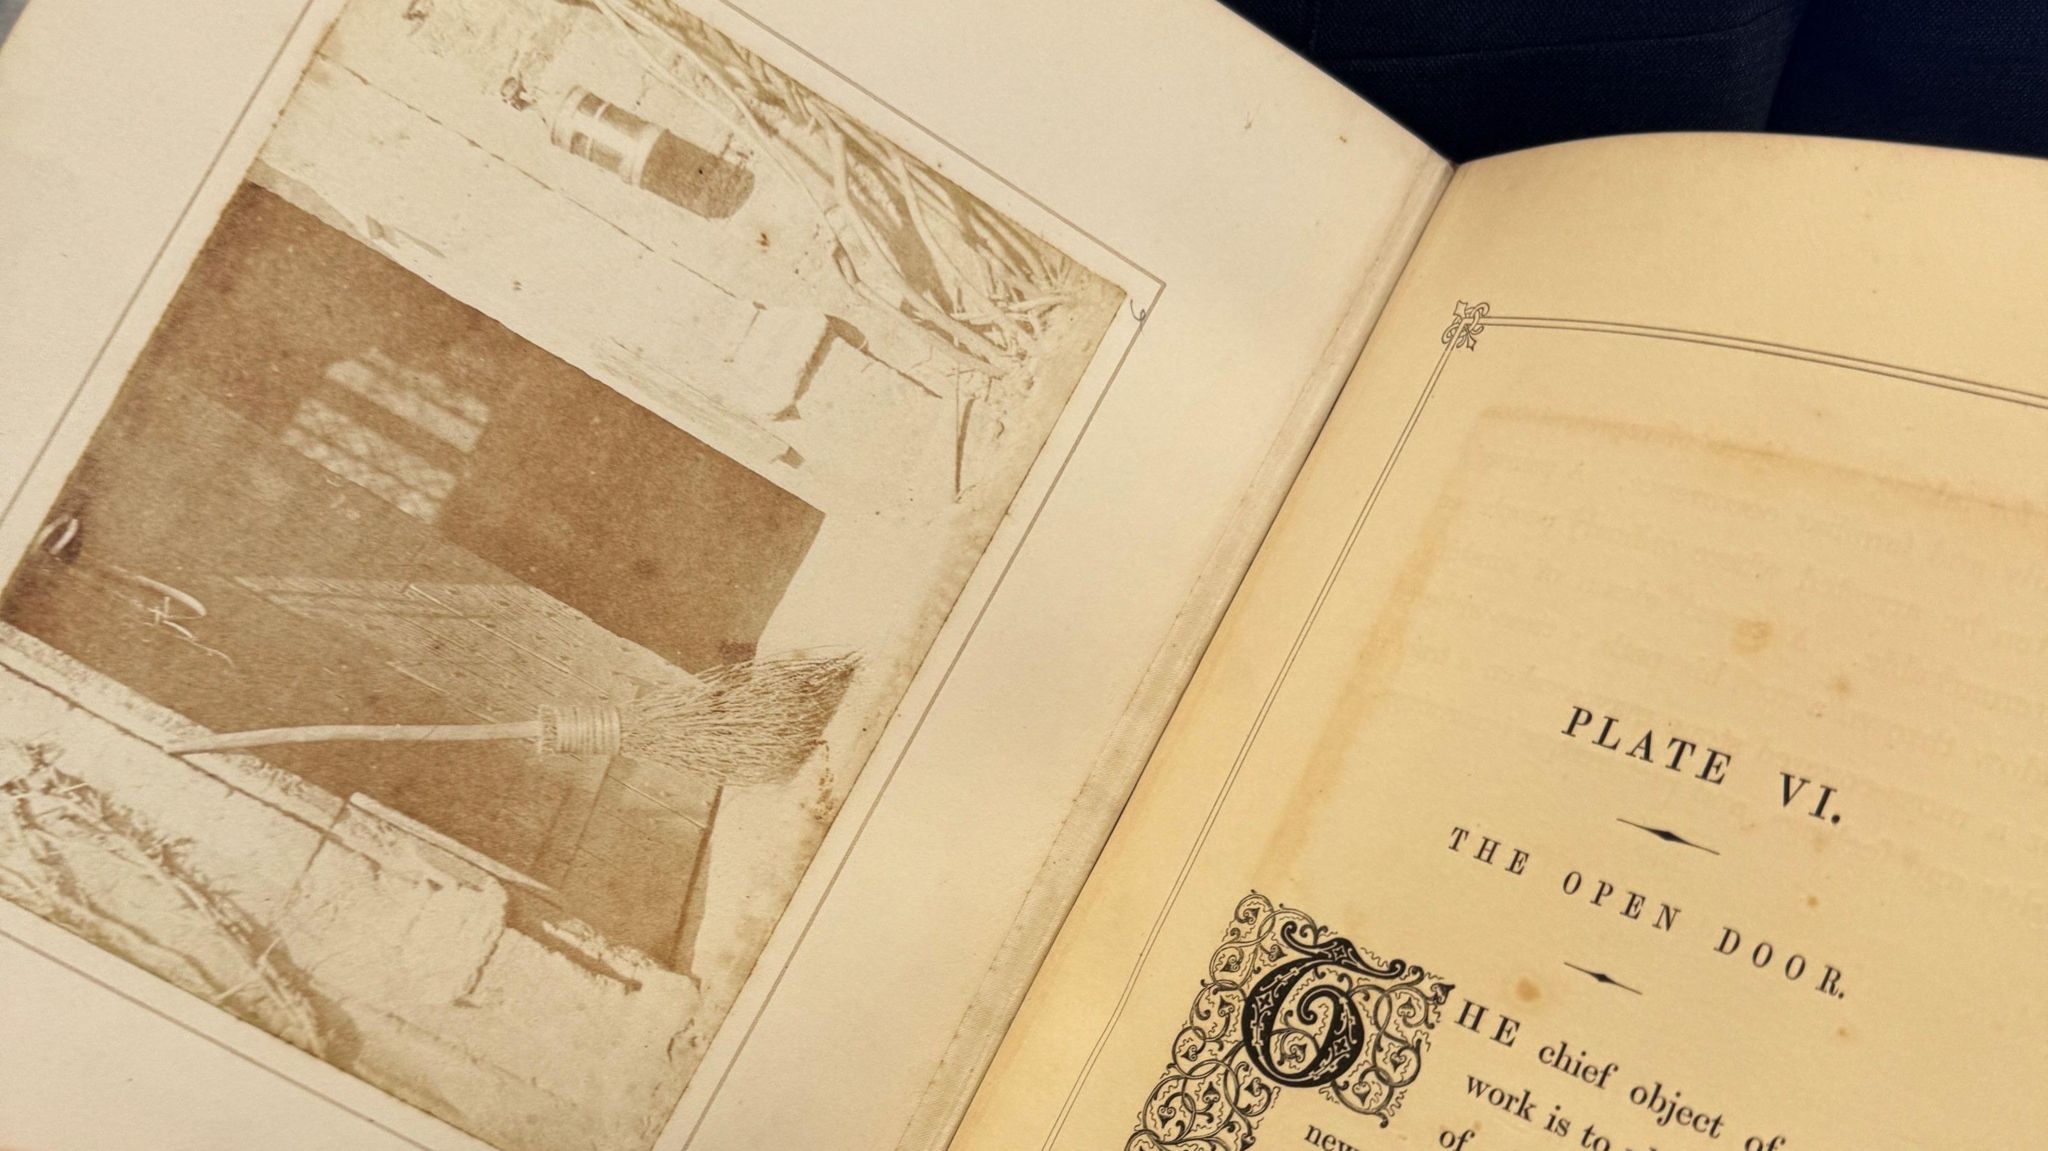 A close-up of one of Fox Talbot's books, containing an image of an open door with a broom next to it